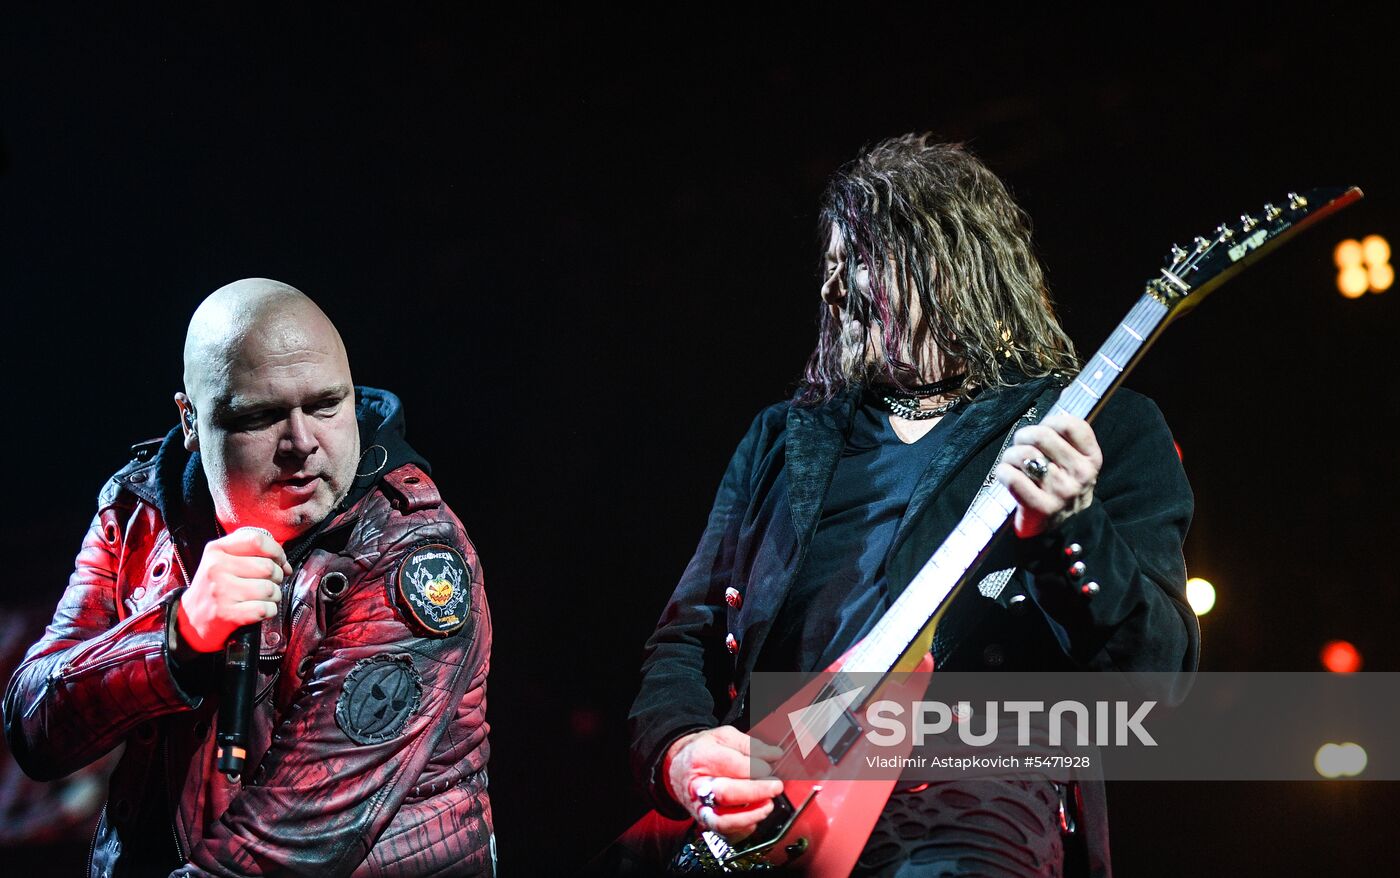 Helloween band performs in Moscow